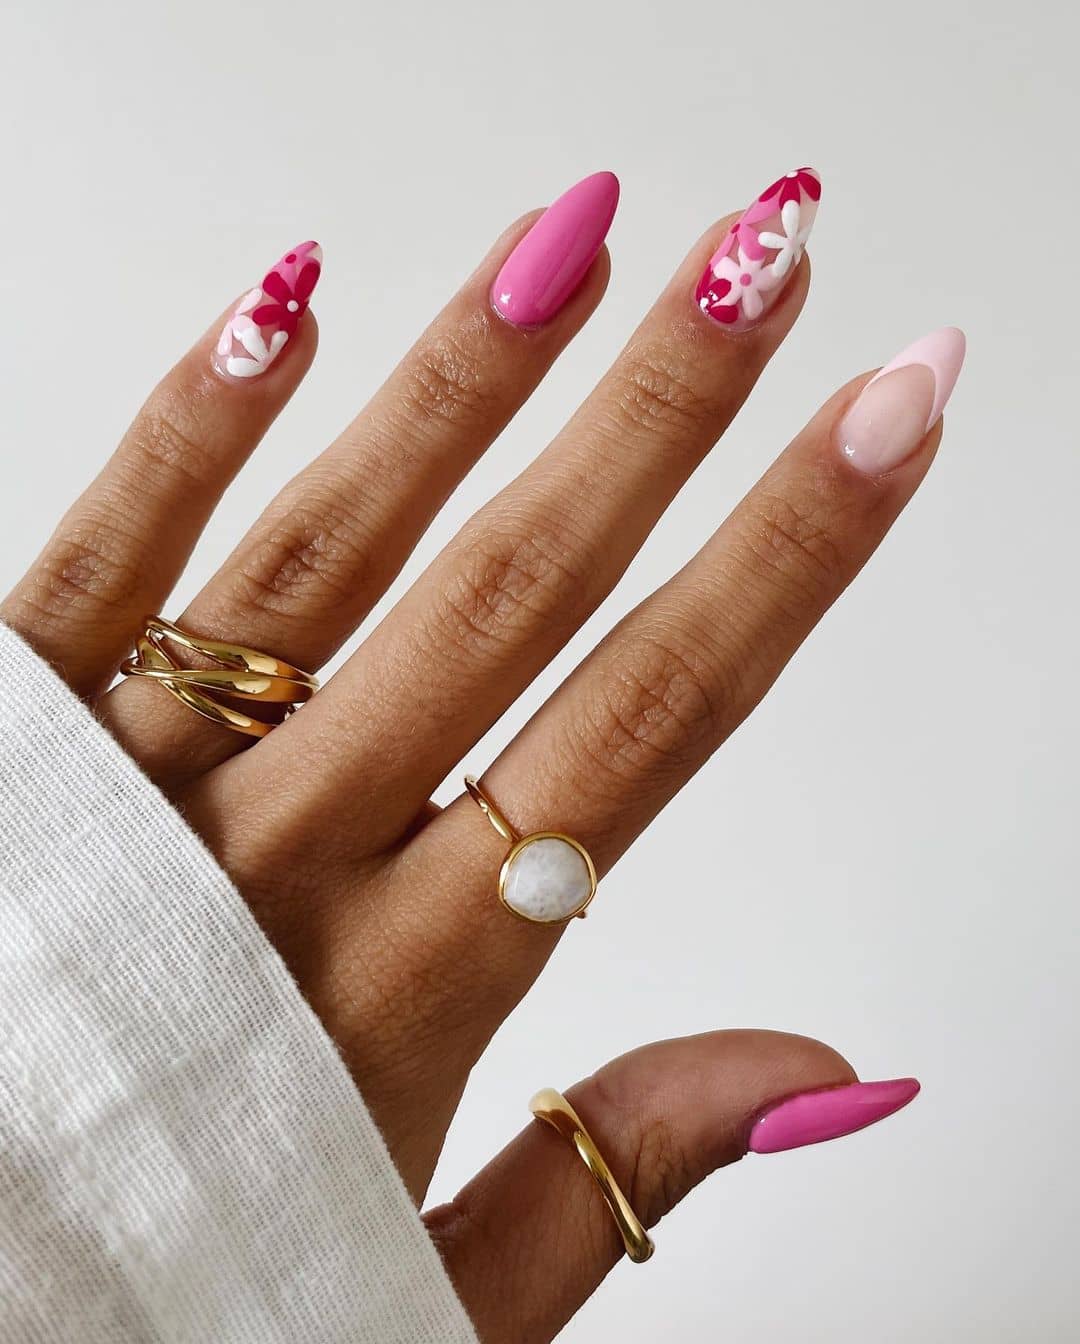 Over 100 Bright Summer Nail Art Designs That Will Be So Trendy images 65